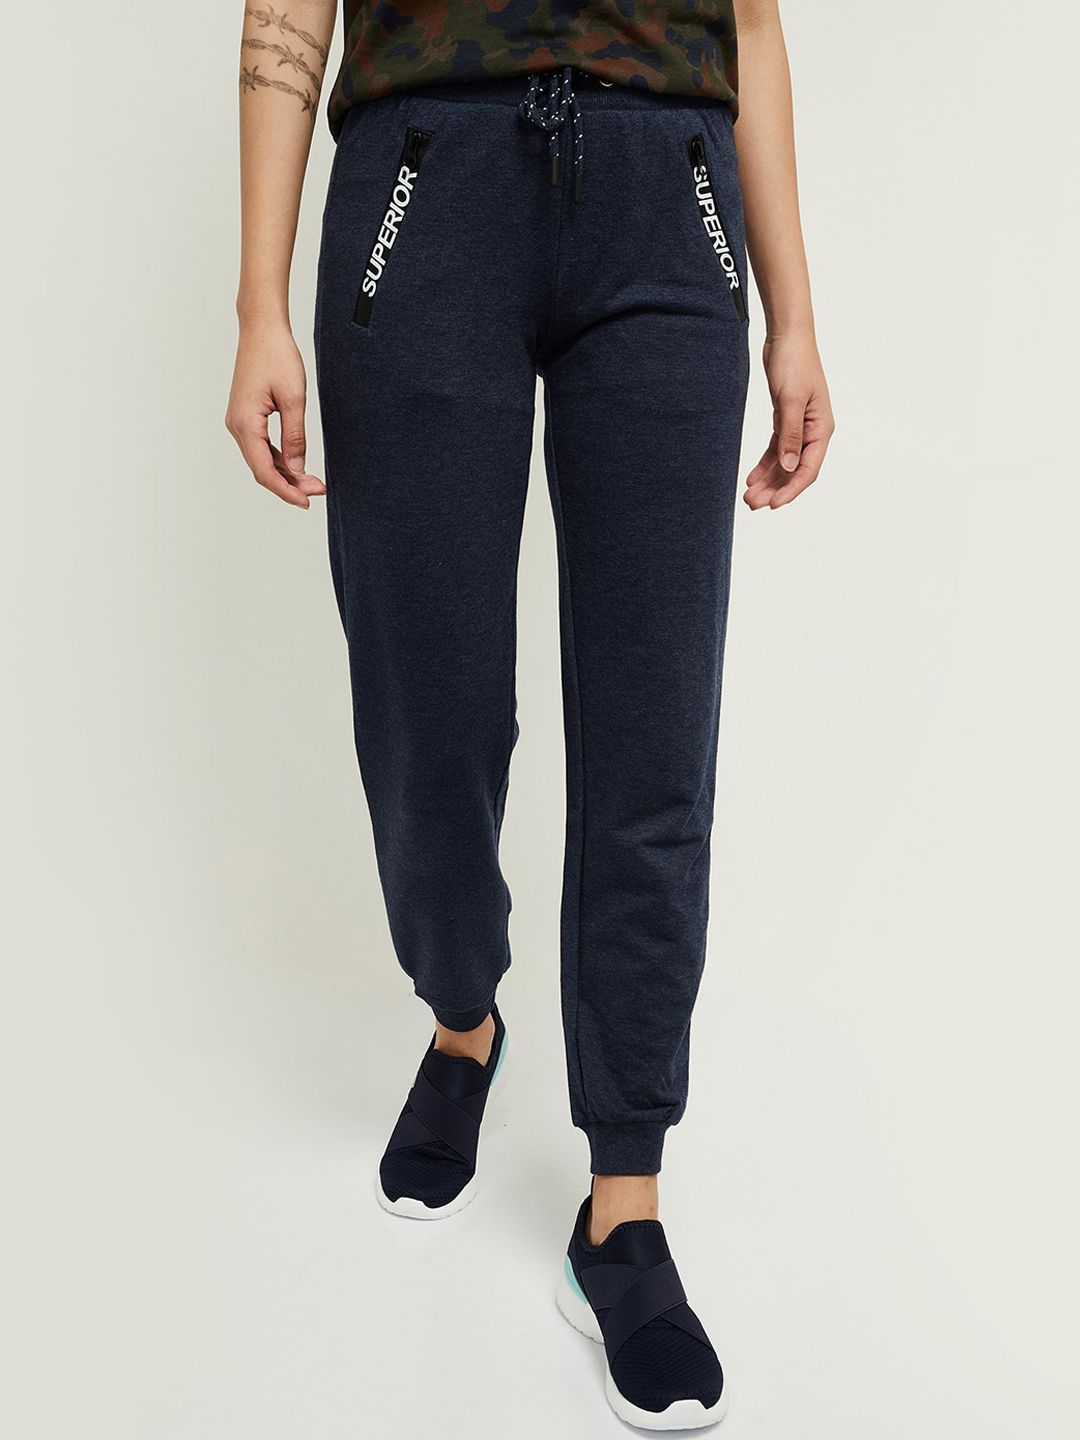 max Women Navy Blue Solid Polycotton Joggers Price in India